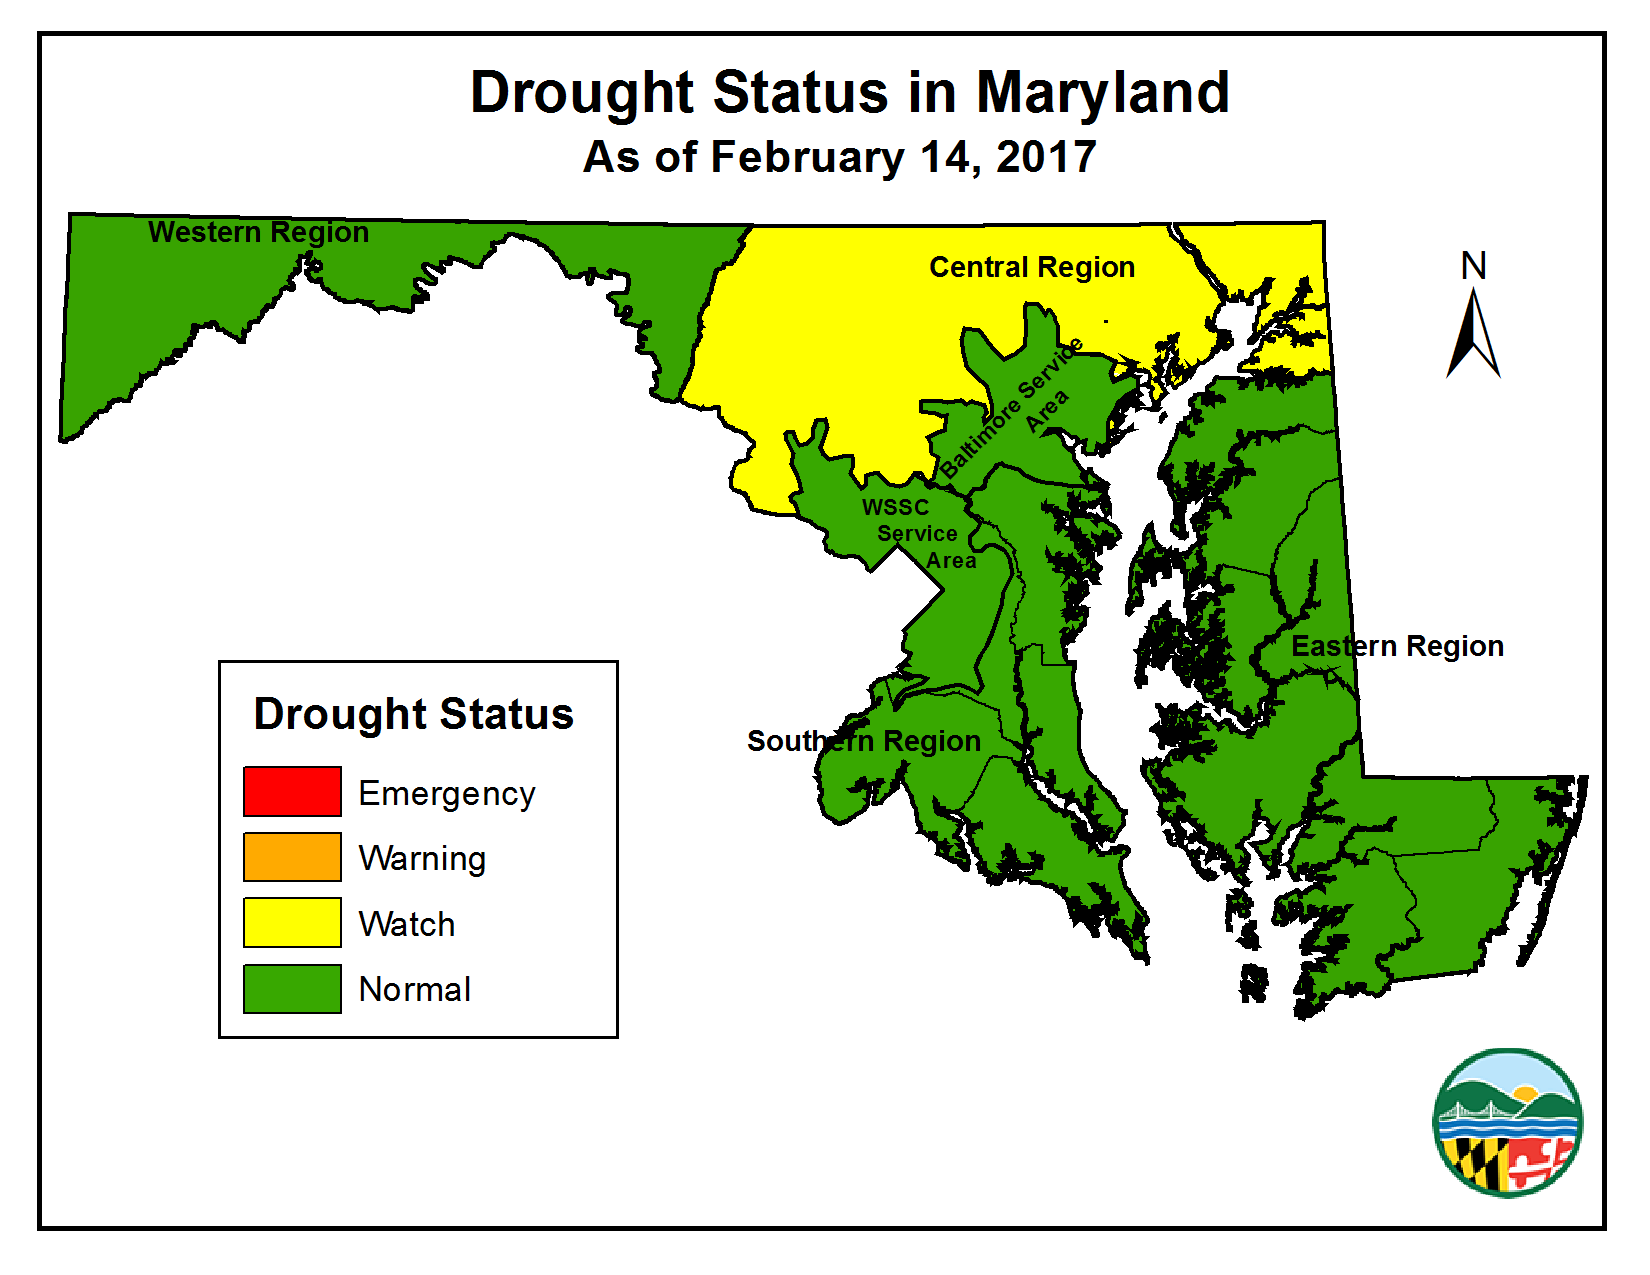 Drought Status as of February 14, 2017